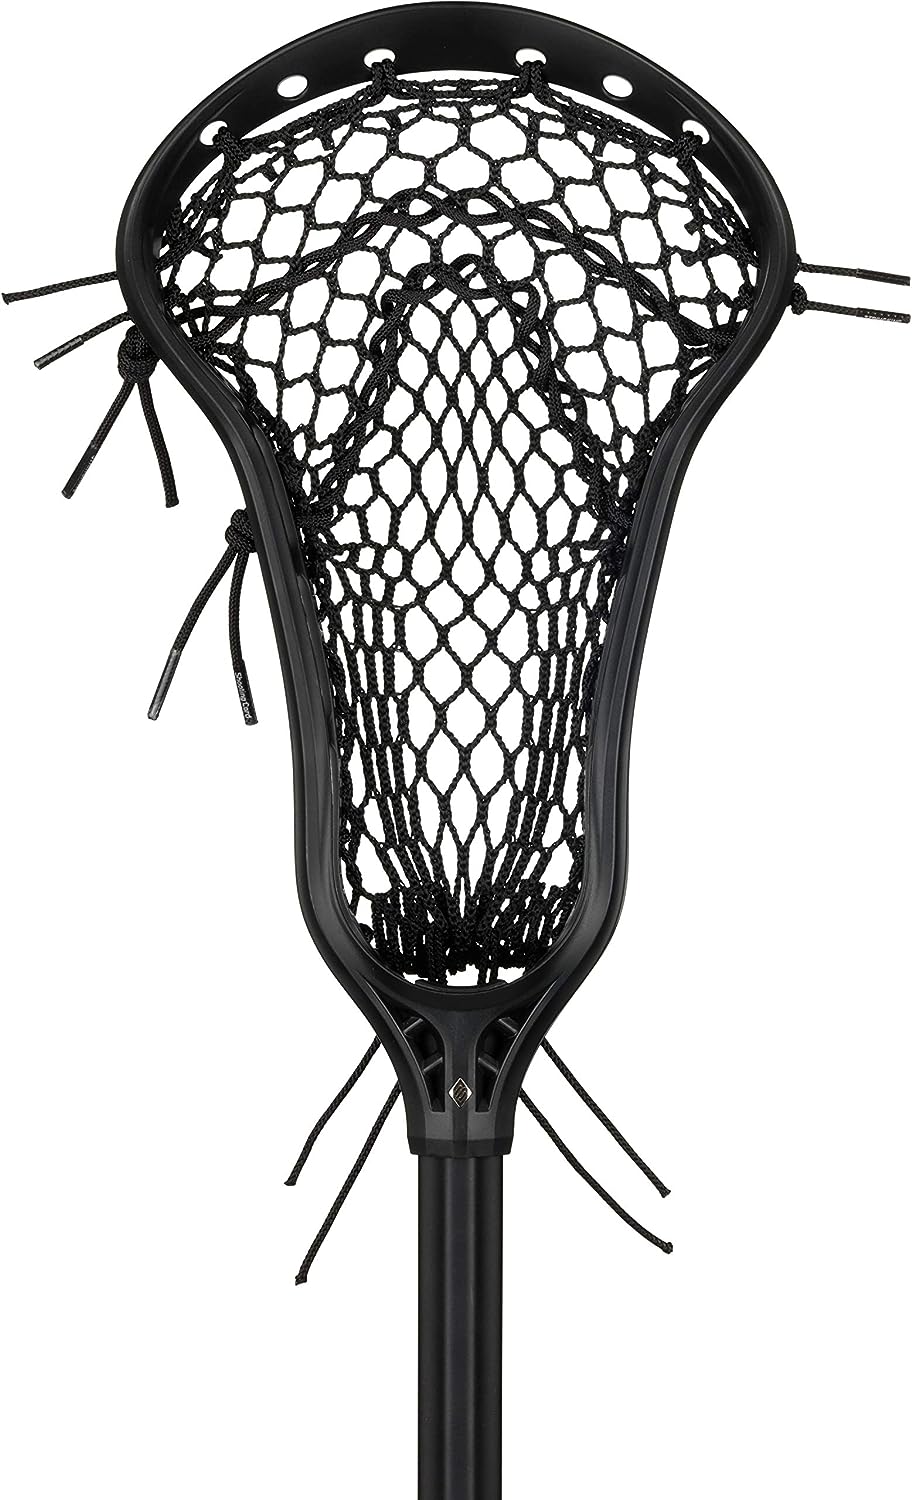 stringking women’s complete 2 pro offense lacrosse stick with metal 3 pro shaft and women's type 4 mesh